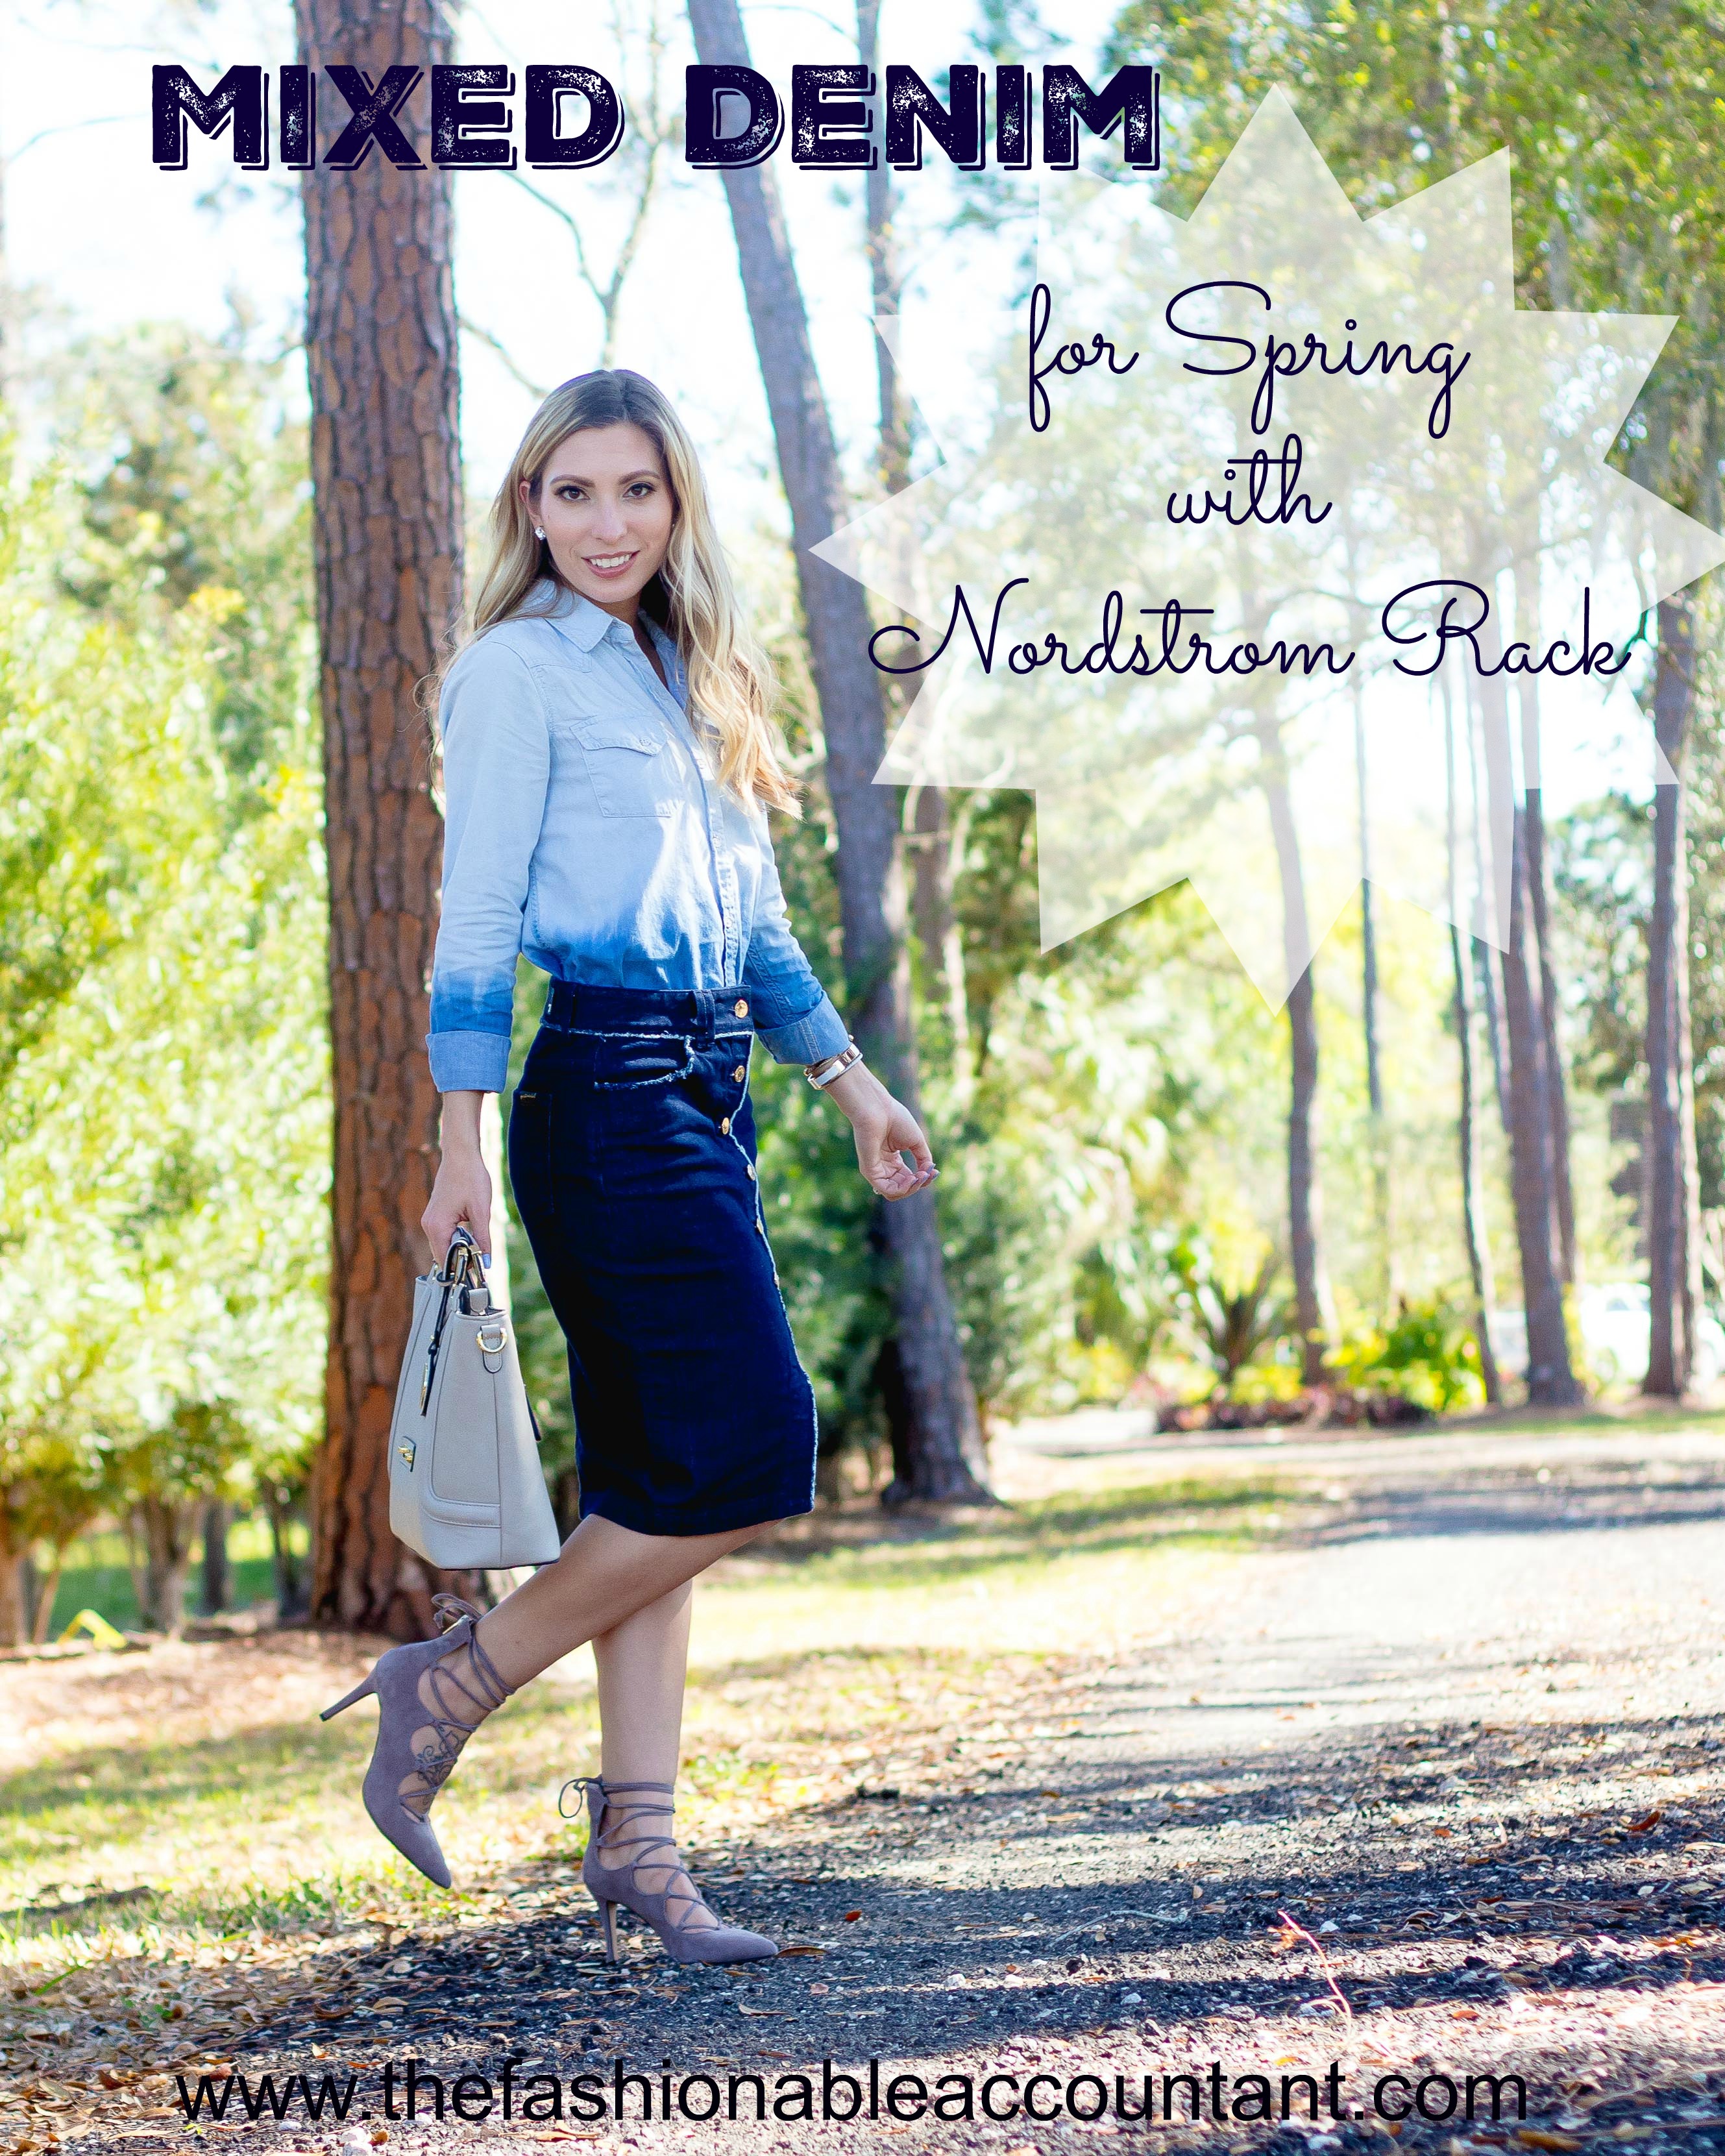 Mixed Denim for Spring with Nordstrom Rack